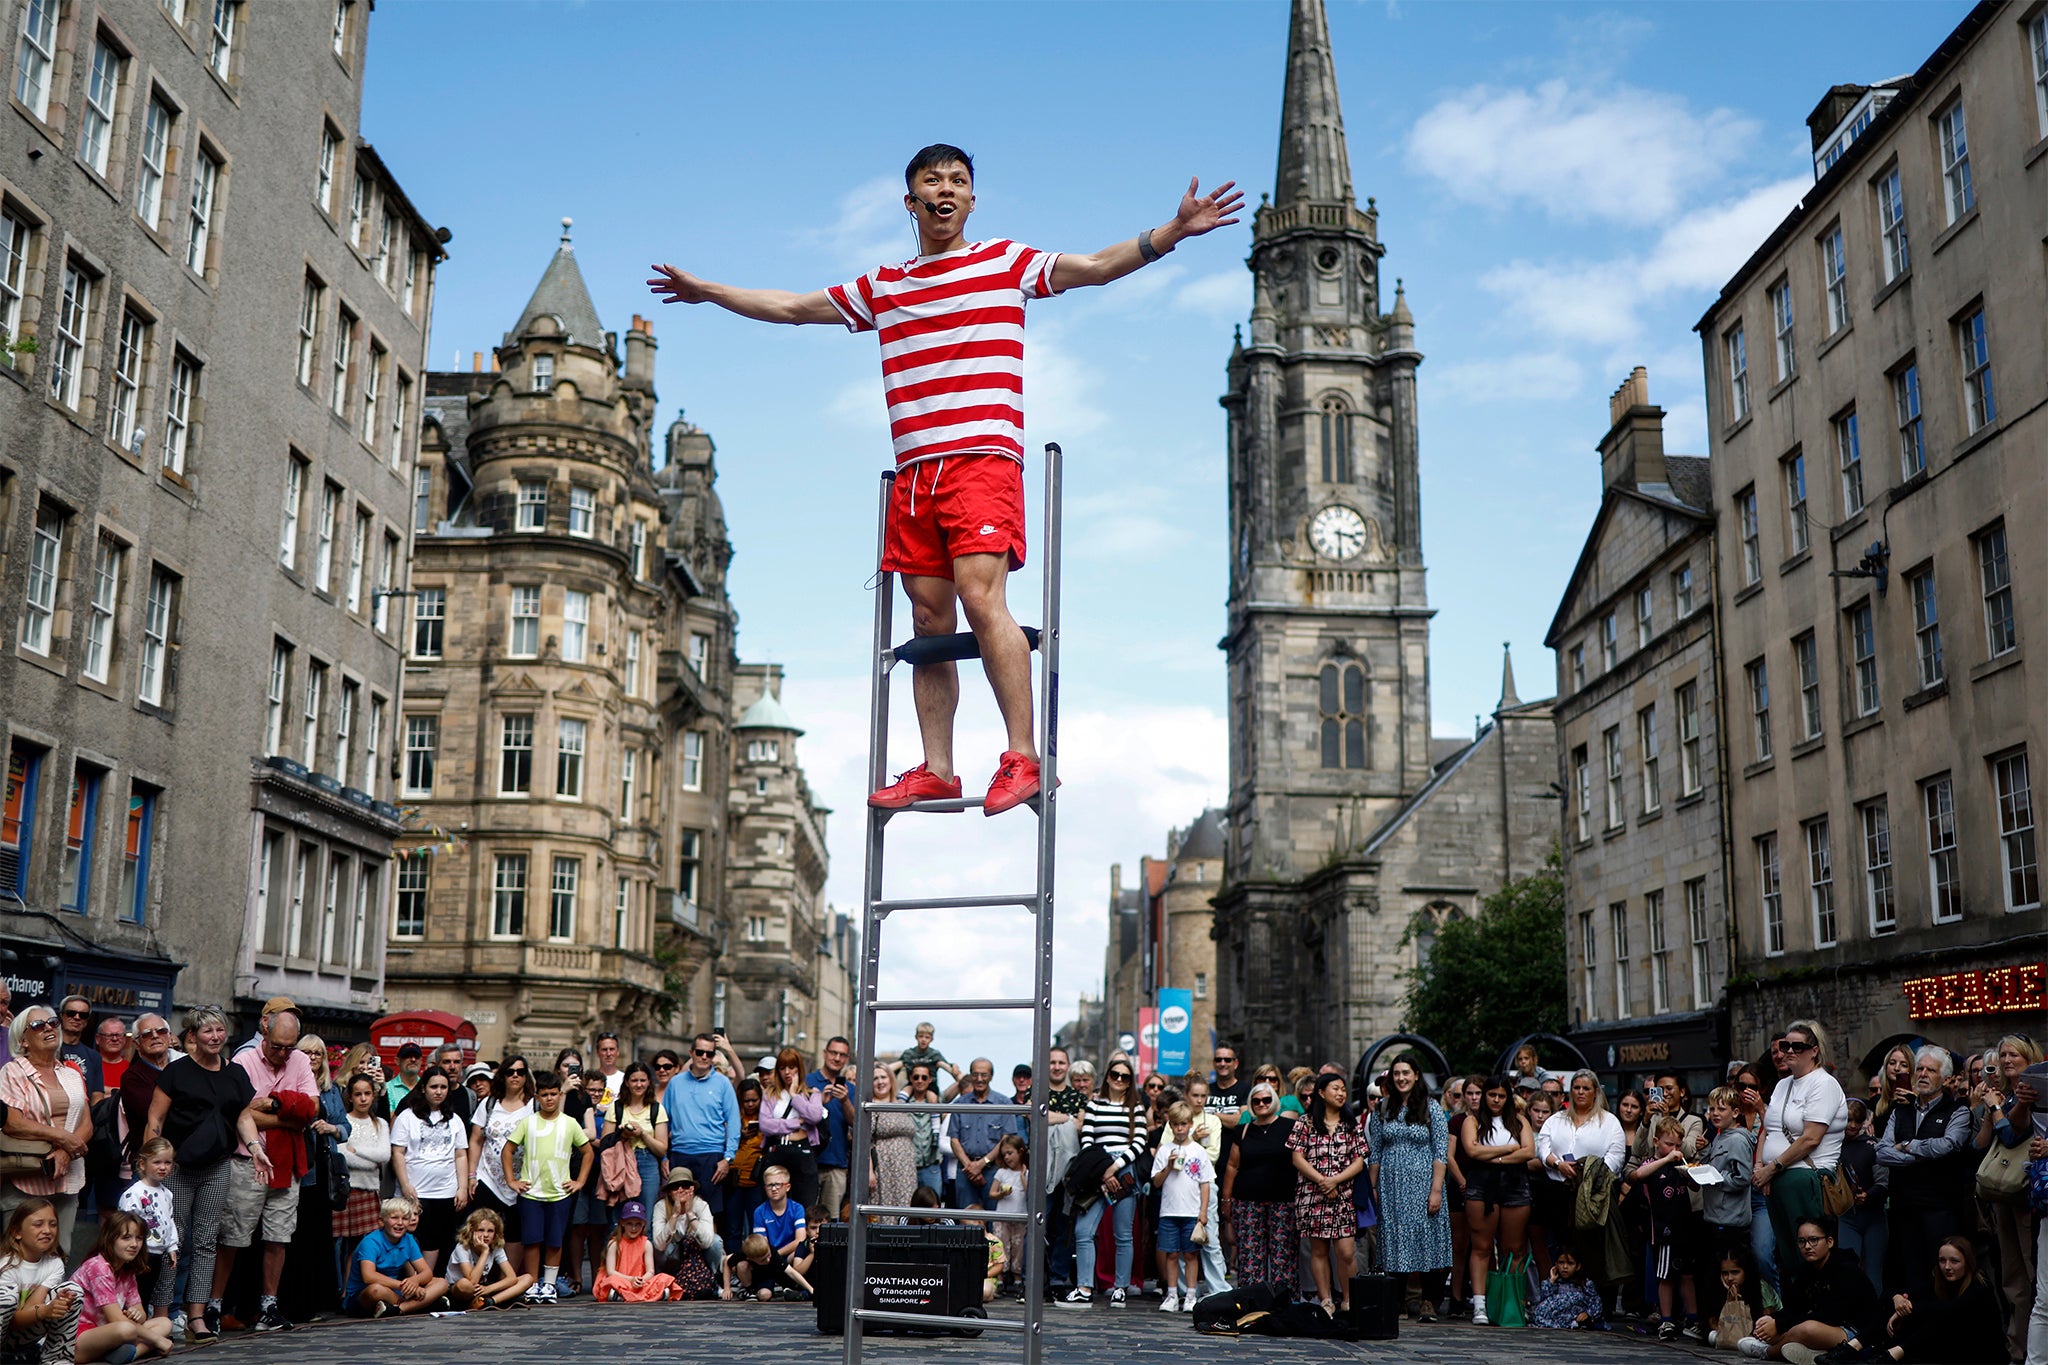 Scotland’s capital has always had a difficult relationship with the tourists who flock to it